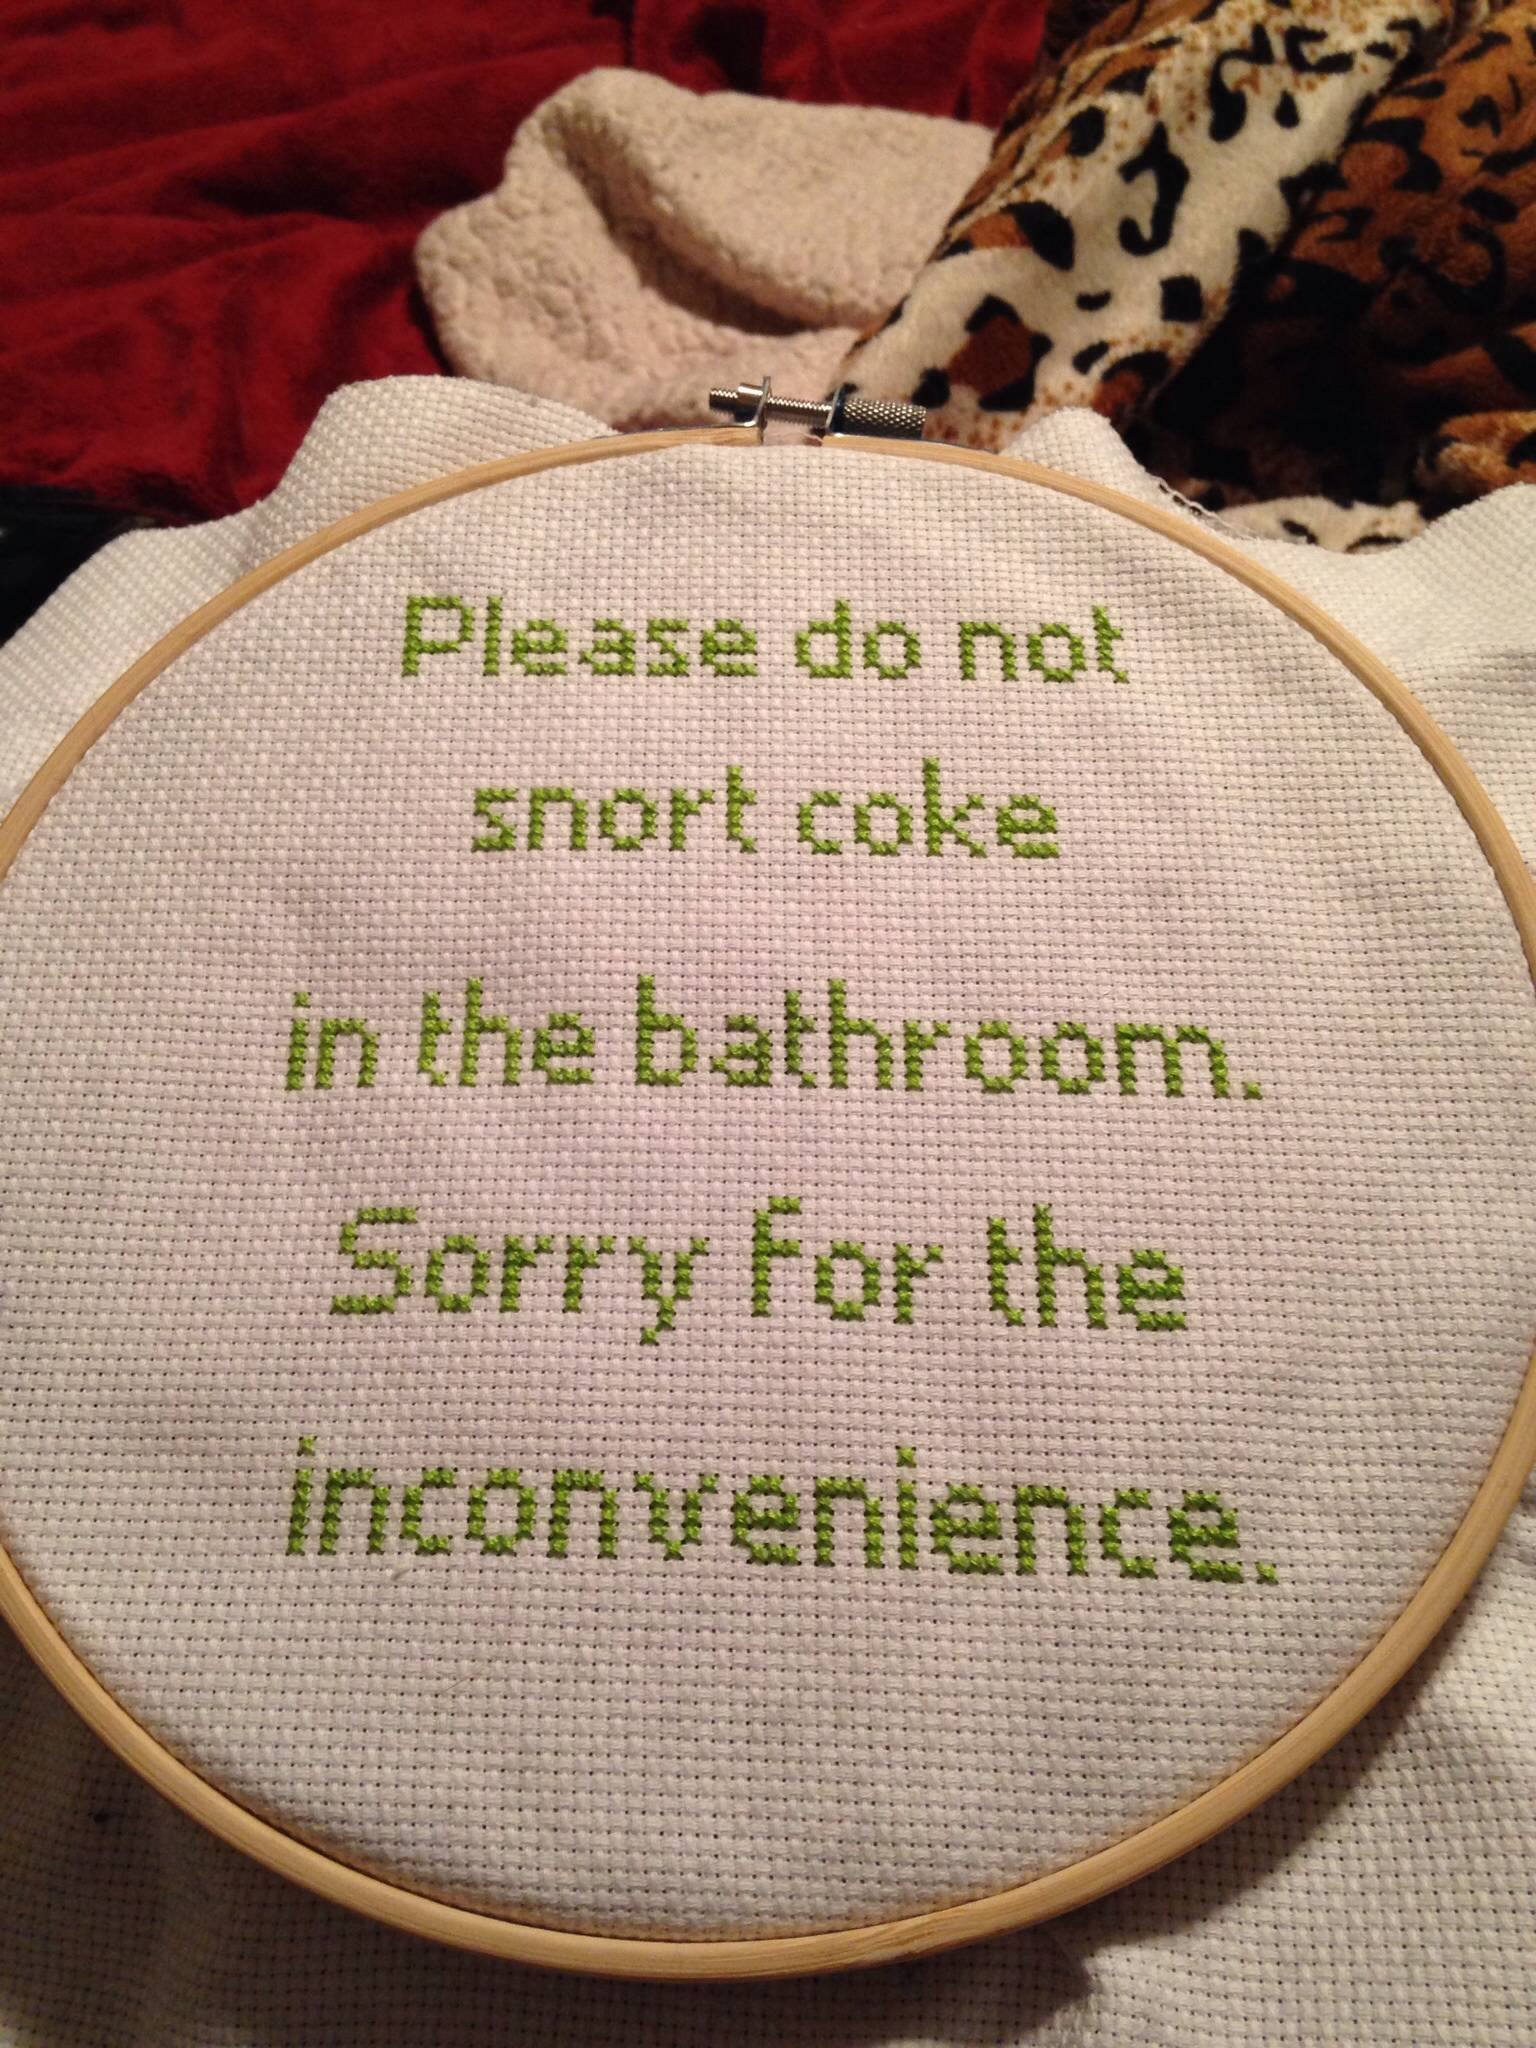 Finished this cross stitch today.